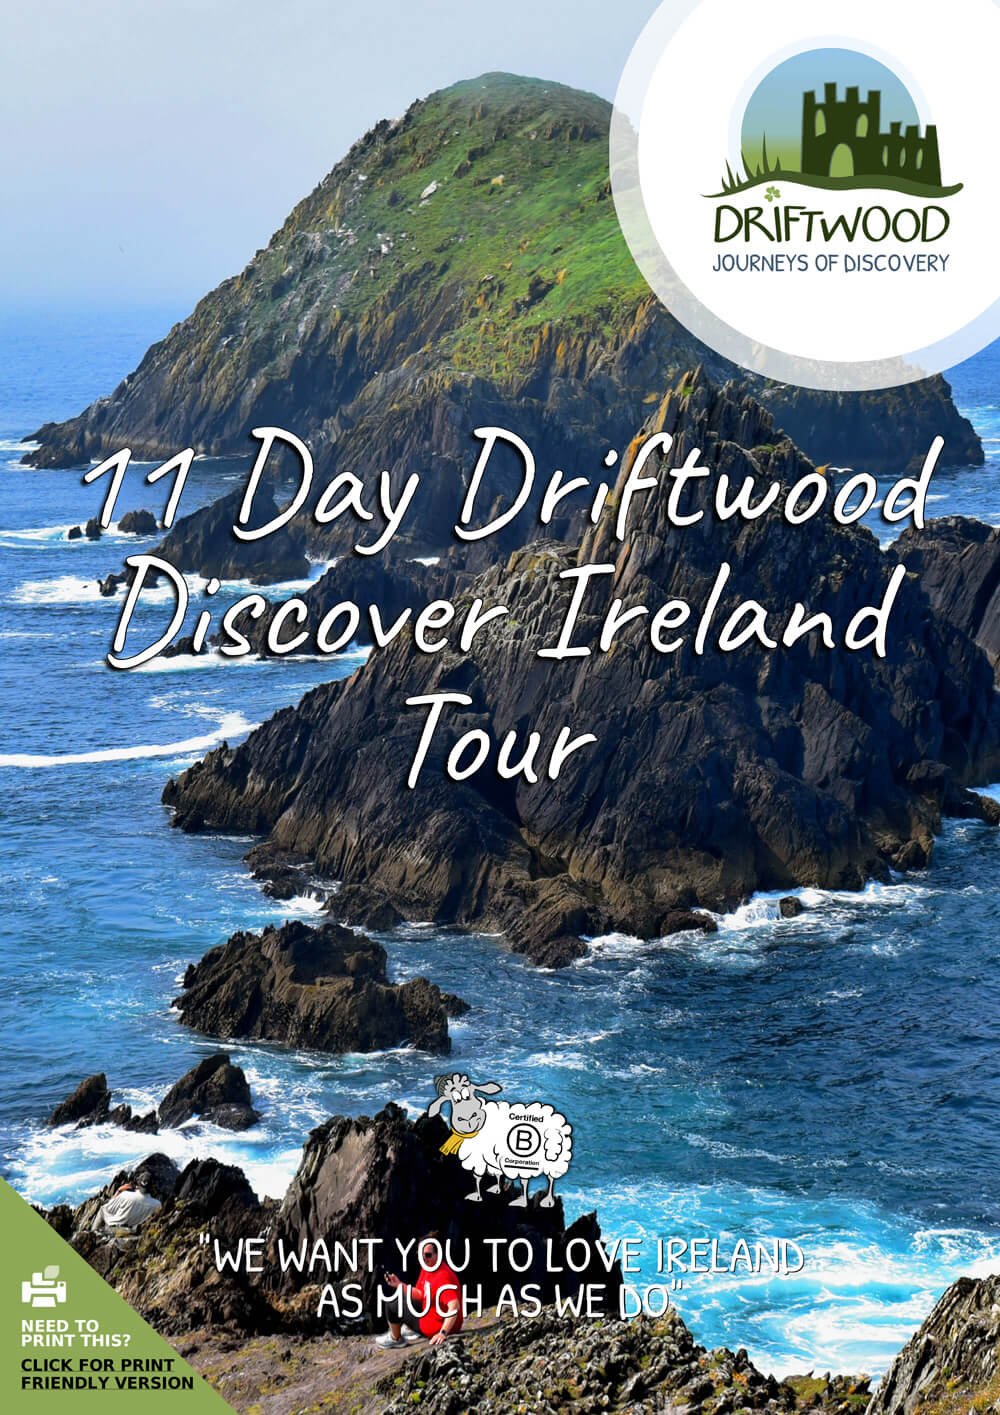 11 Day Driftwood Discover Ireland Tour itinerary cover